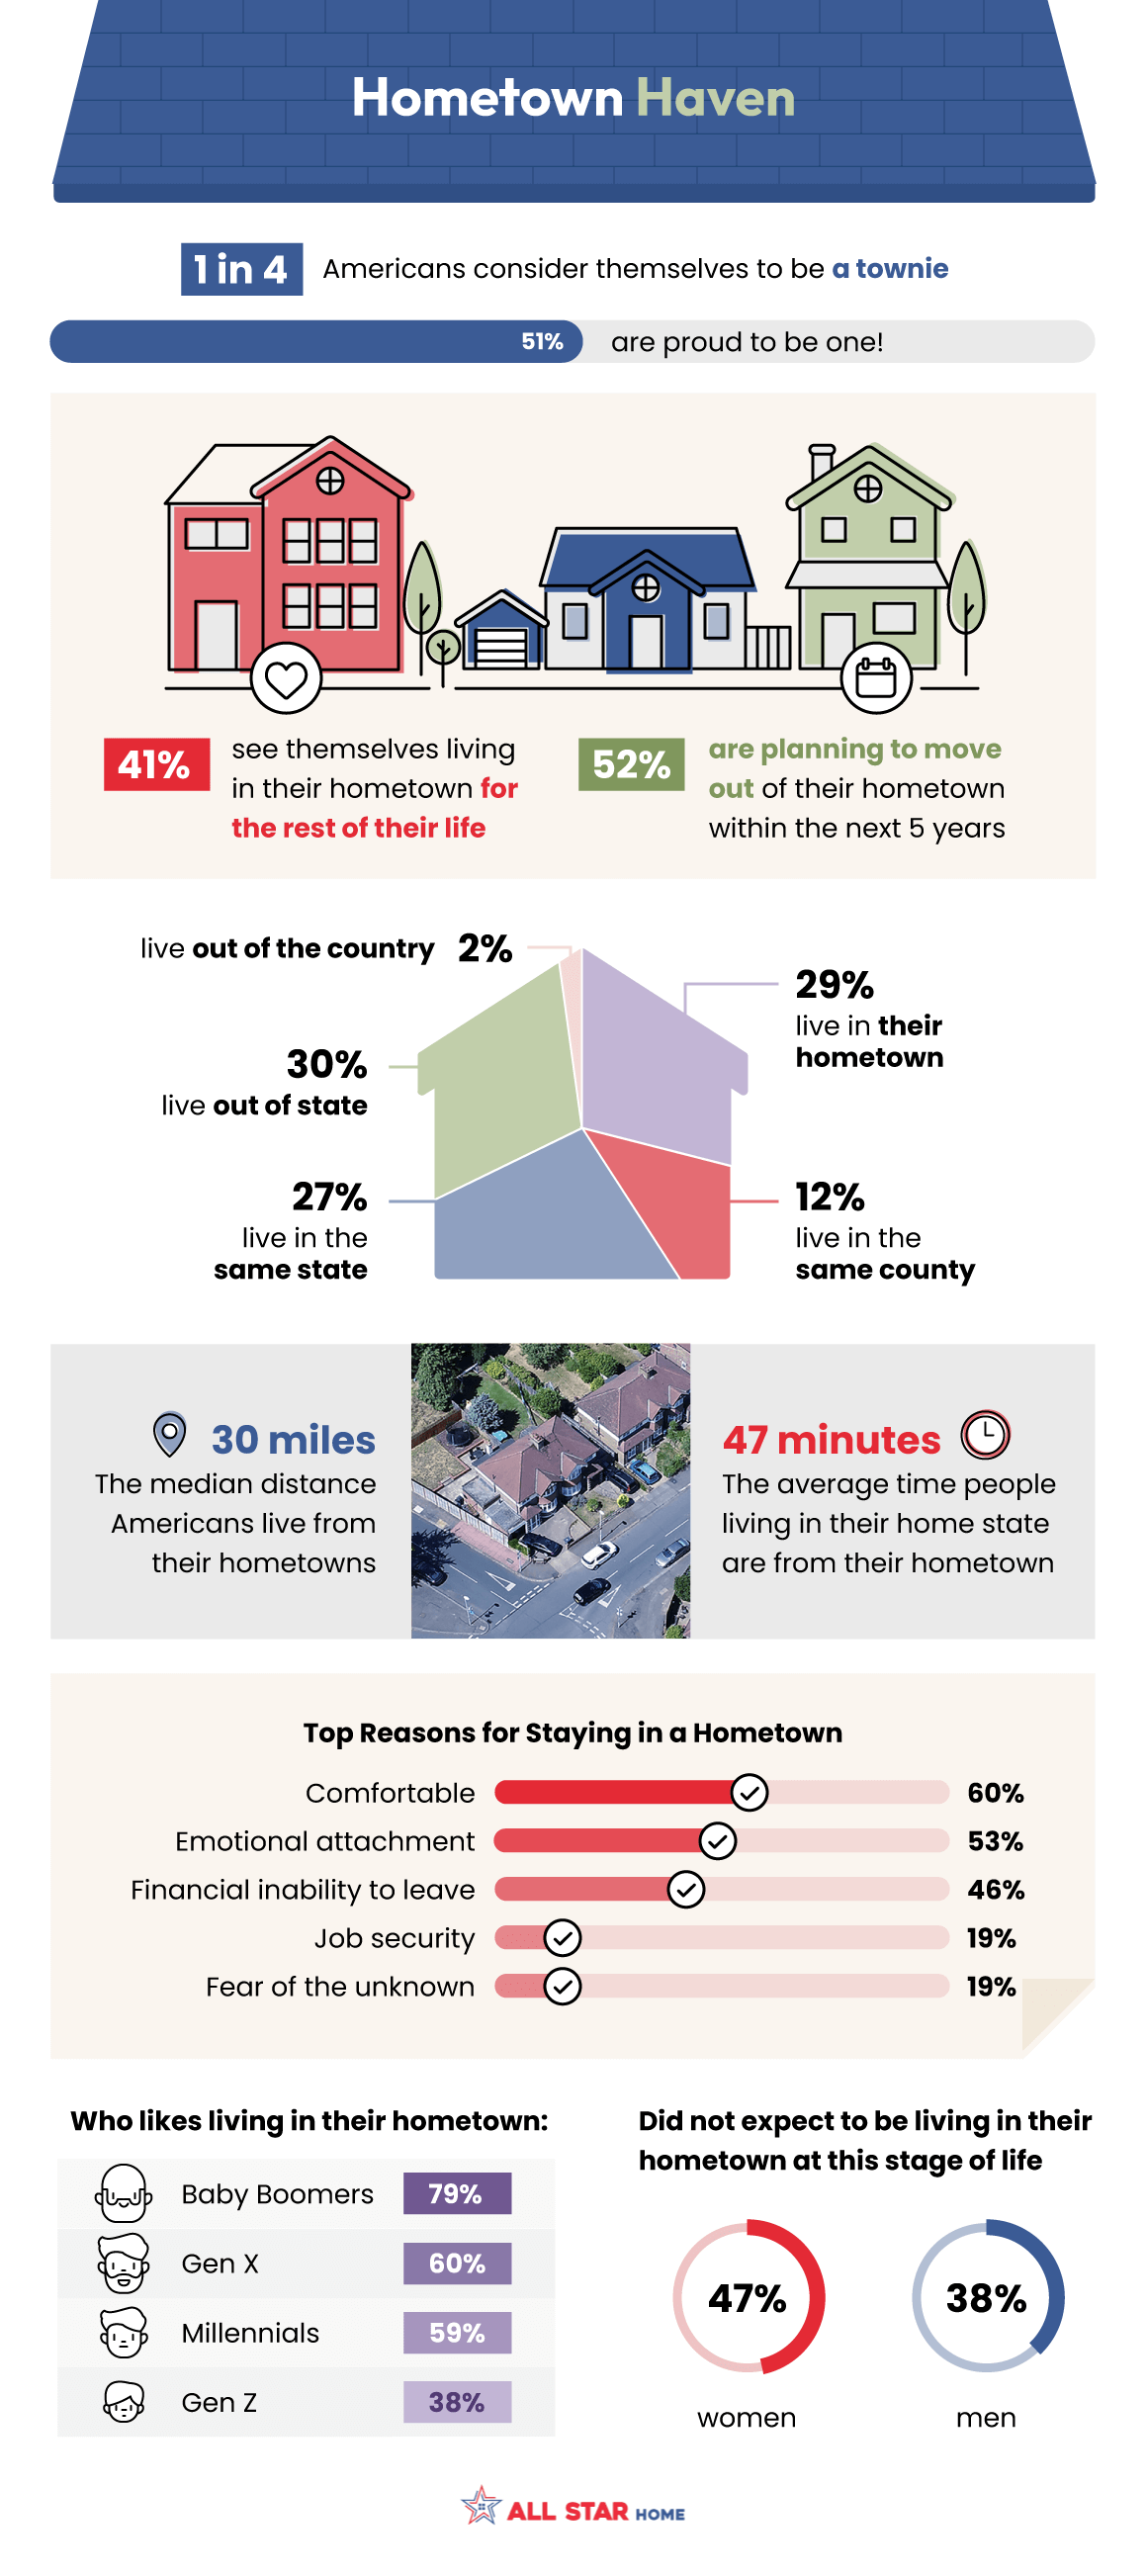 Reasons Americans stay in their hometown - allstarhome.com survey report 